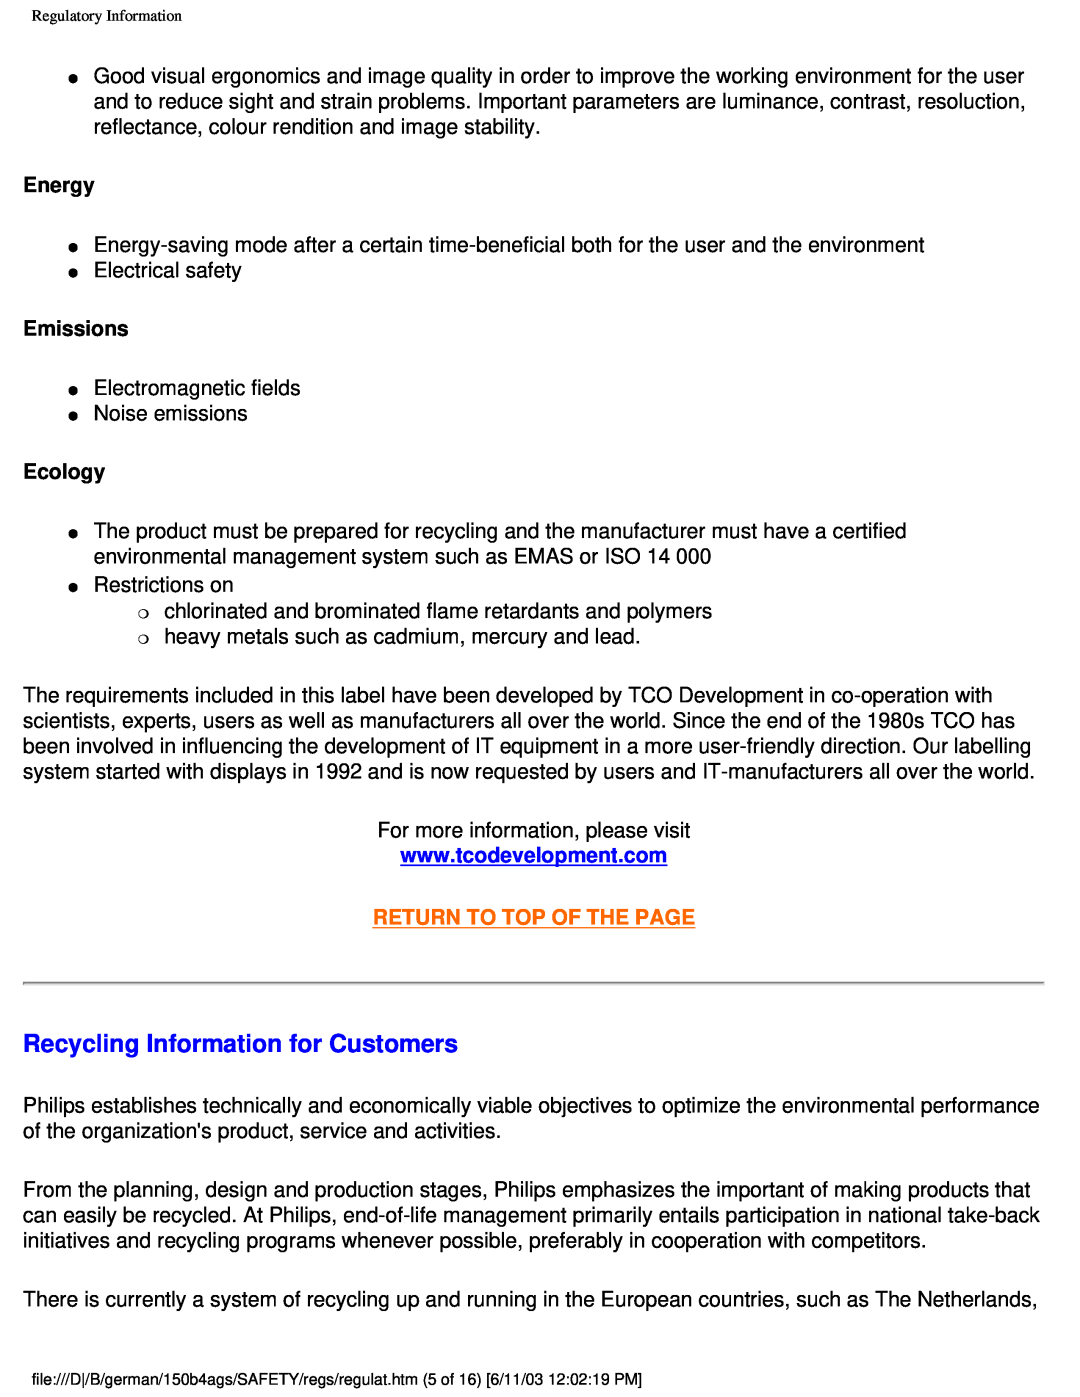 Philips 150B4AG user manual Recycling Information for Customers, Energy, Emissions, Ecology, Return To Top Of The Page 